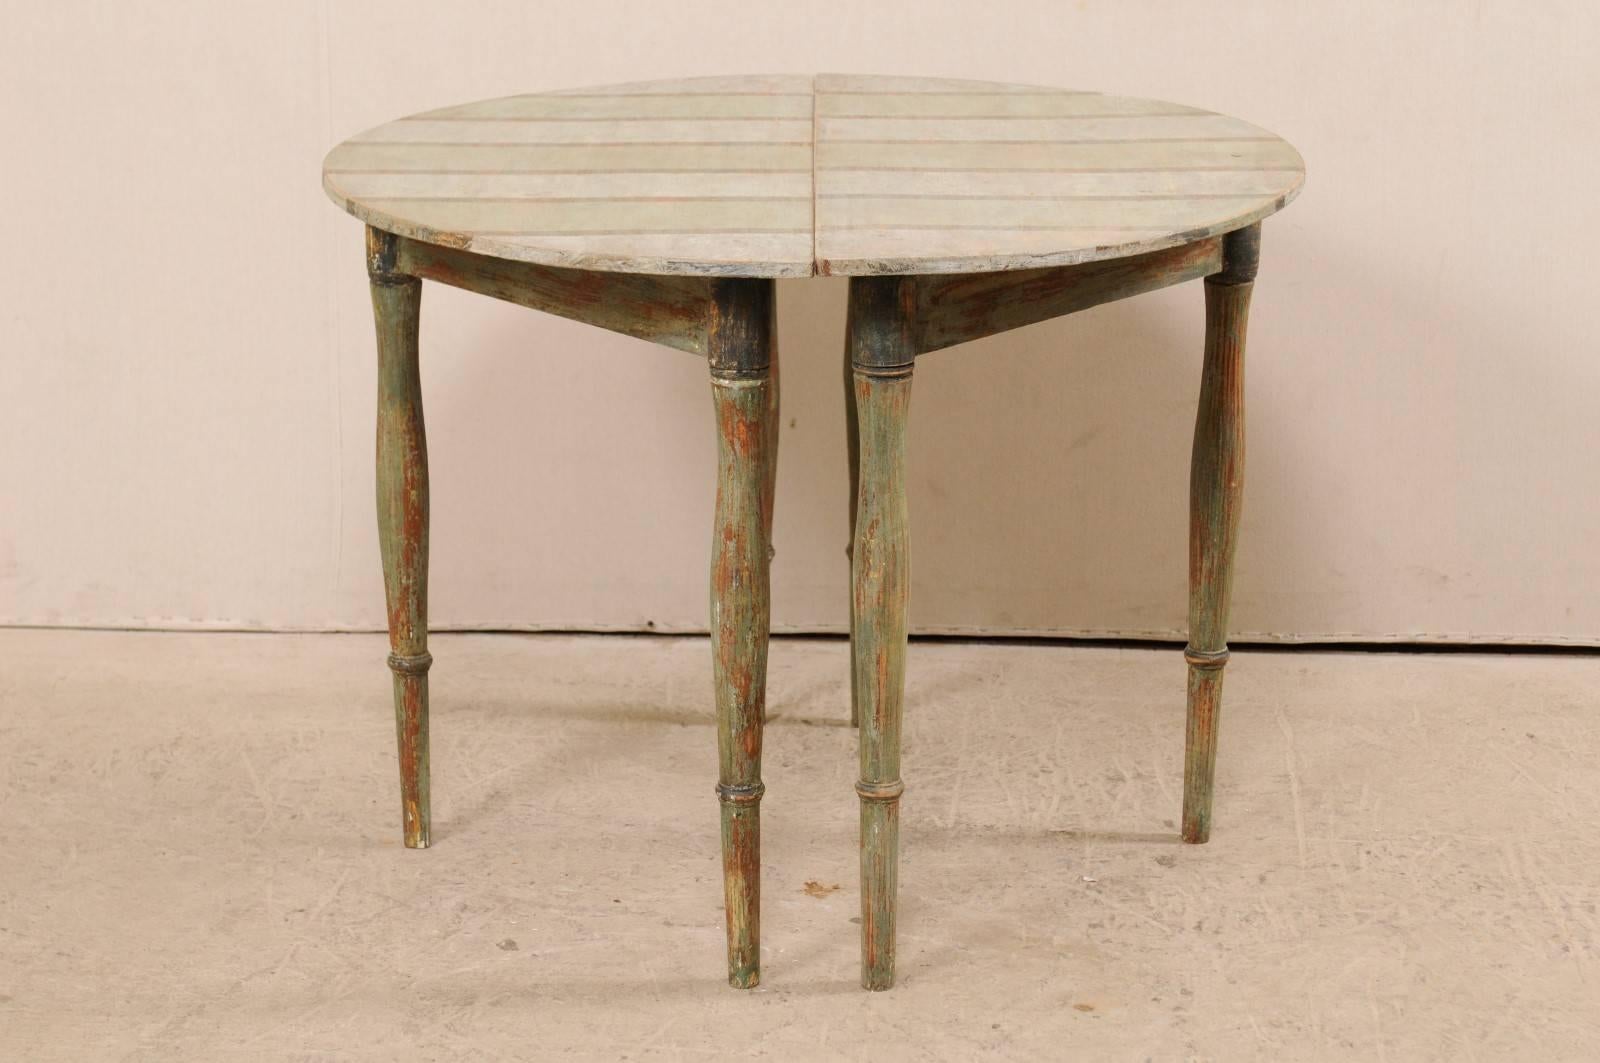 Pair of Swedish 19th Century Painted Wood Demilune Tables with Subtle Stripes 3